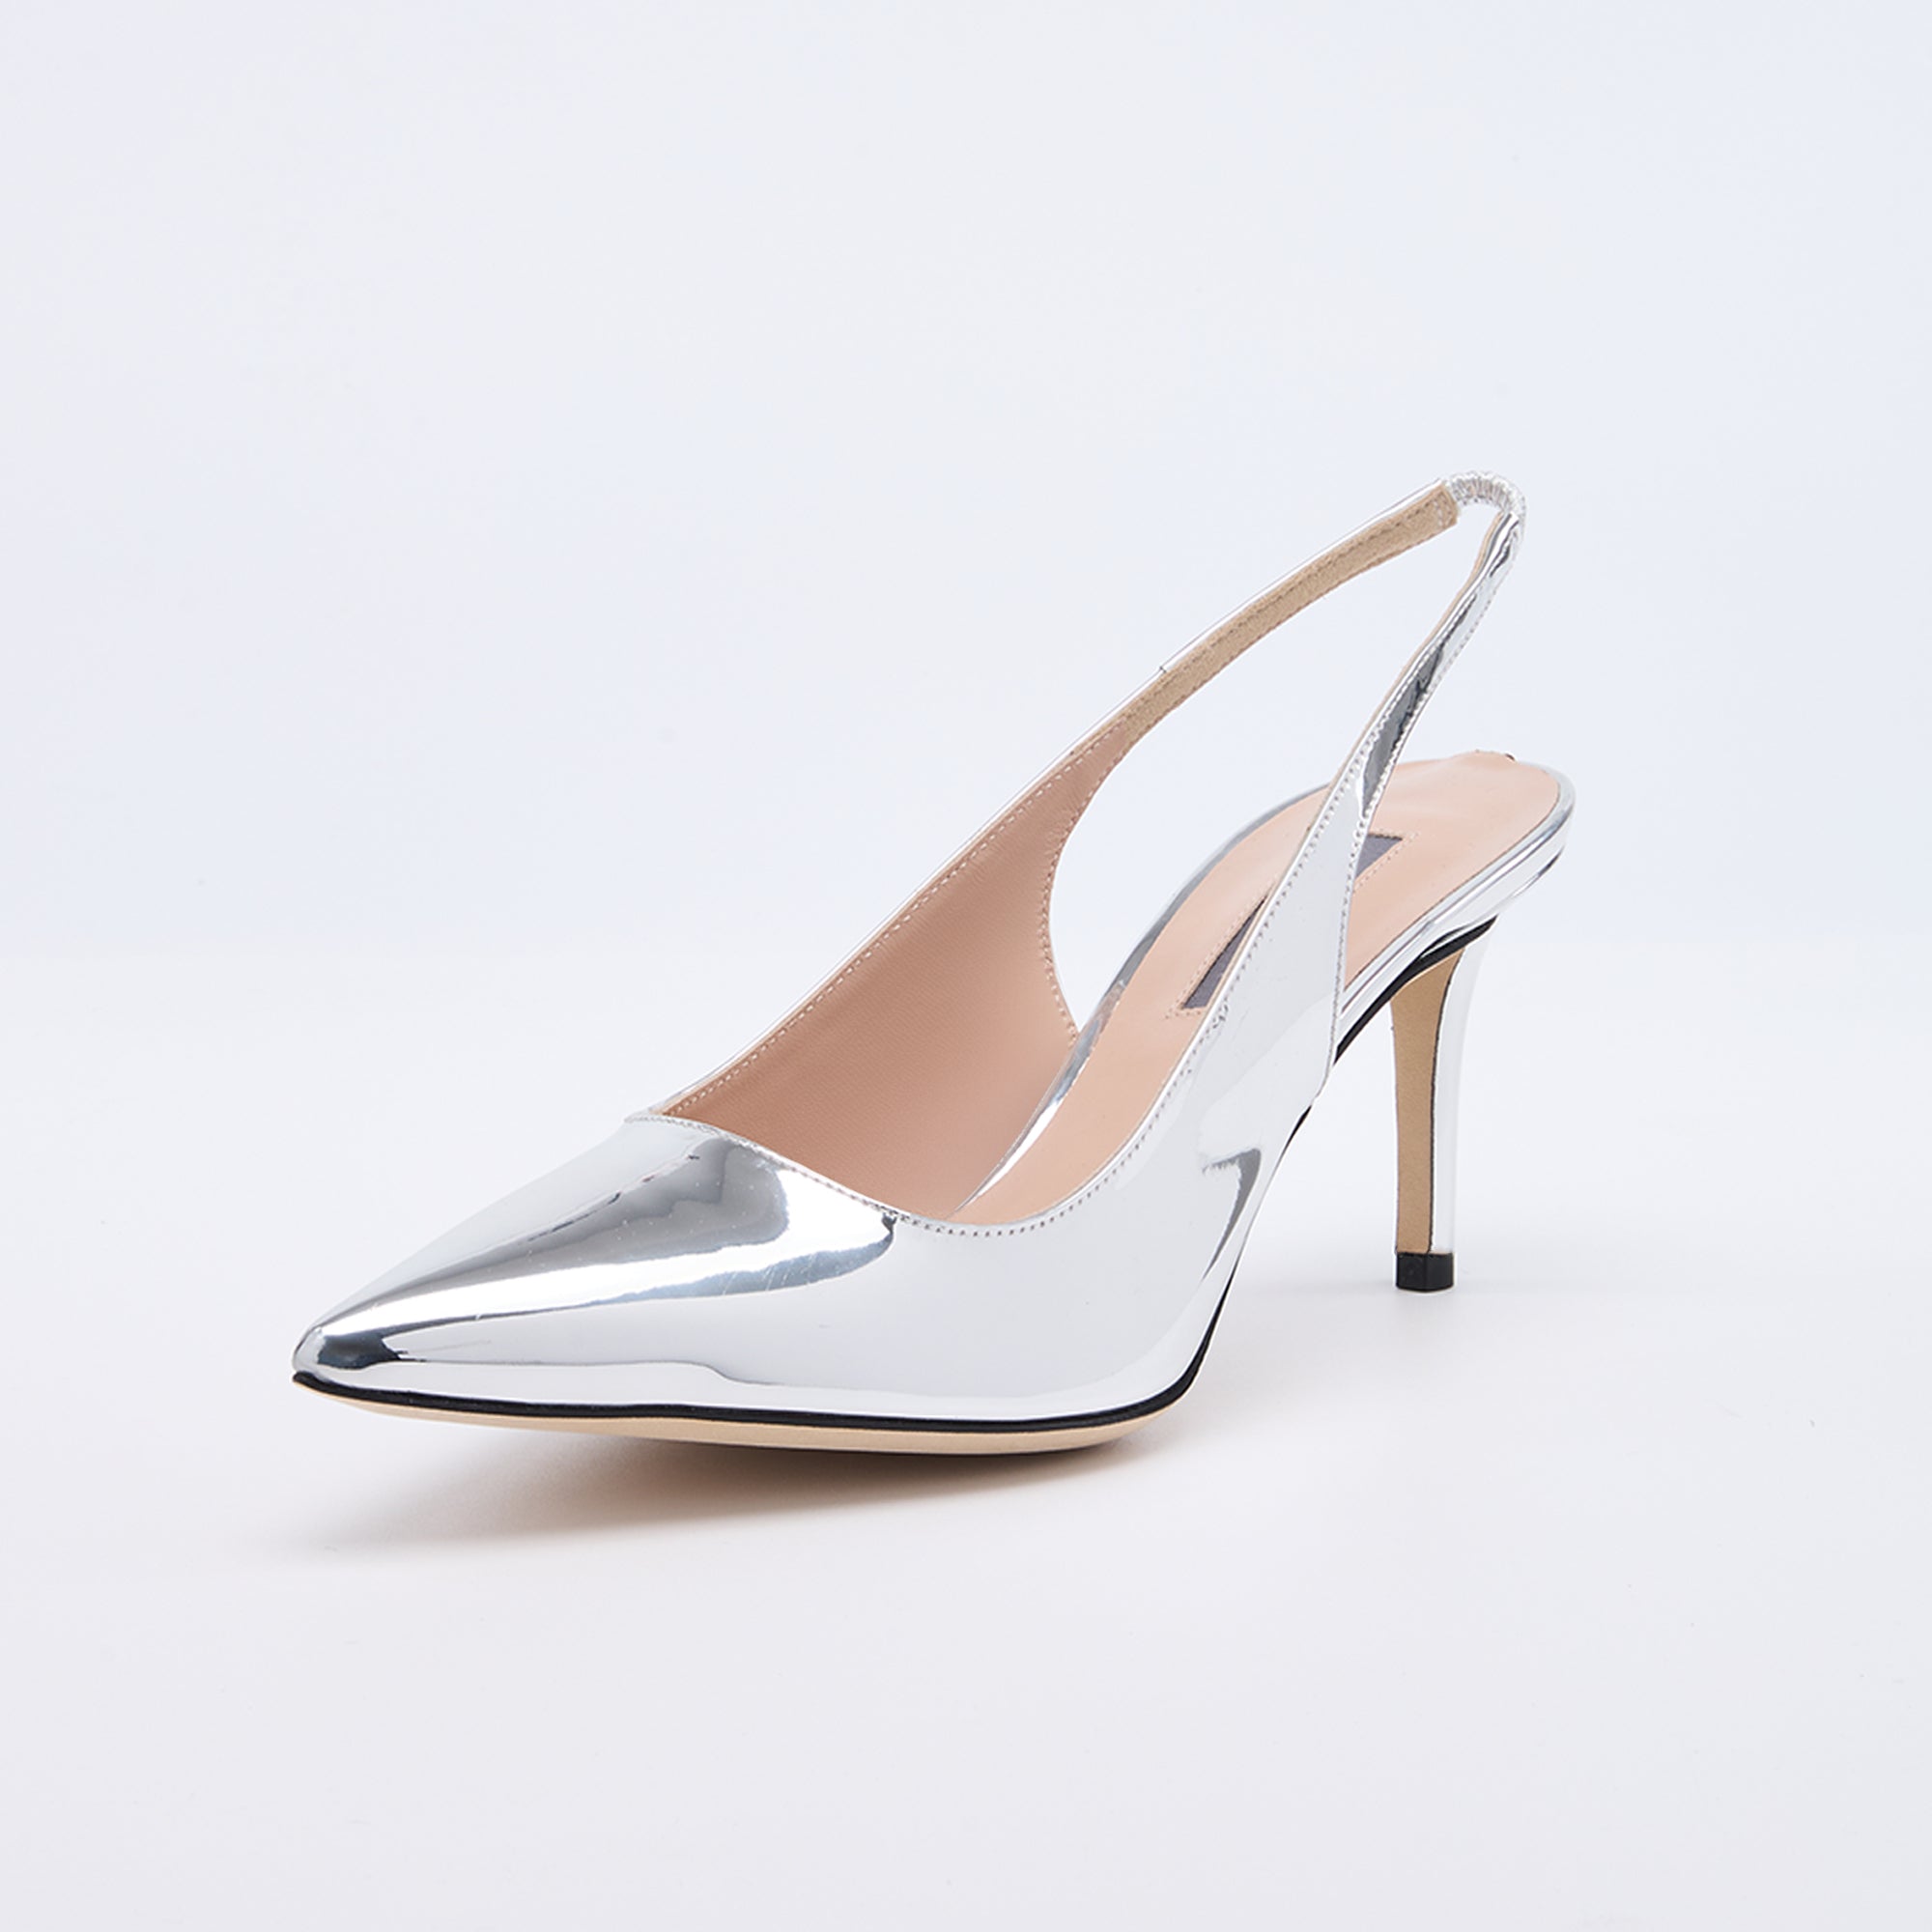 SJP by Sarah Jessica Parker Simplicity 70mm Mirror Reflection Silver Patent Leather Sandals